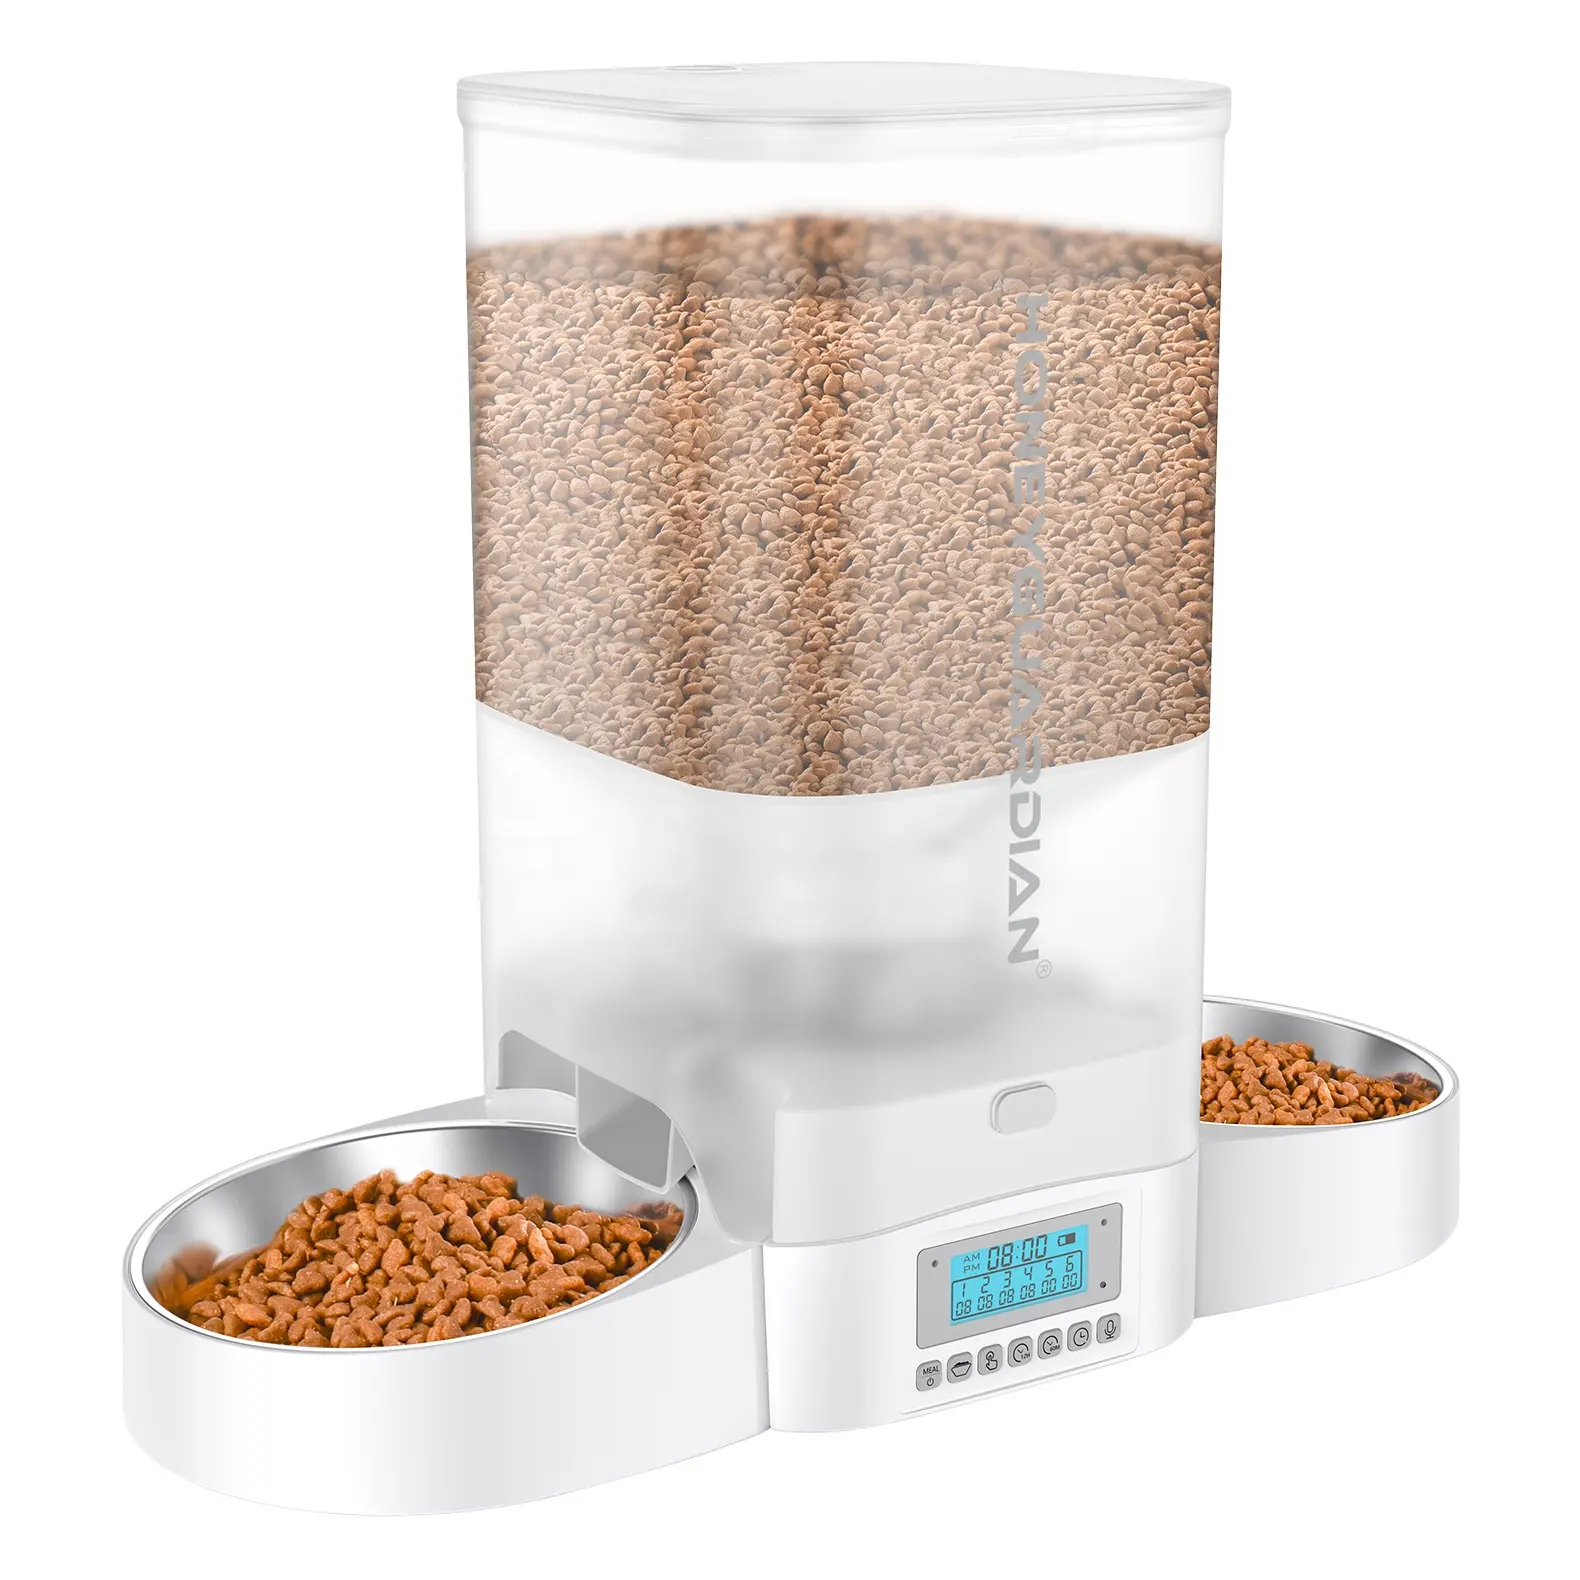 Unique Dual Side Equal Feeding Food Dispenser with Dual Power Supply for Cats Dogs Double Bowl Pet Dispenser